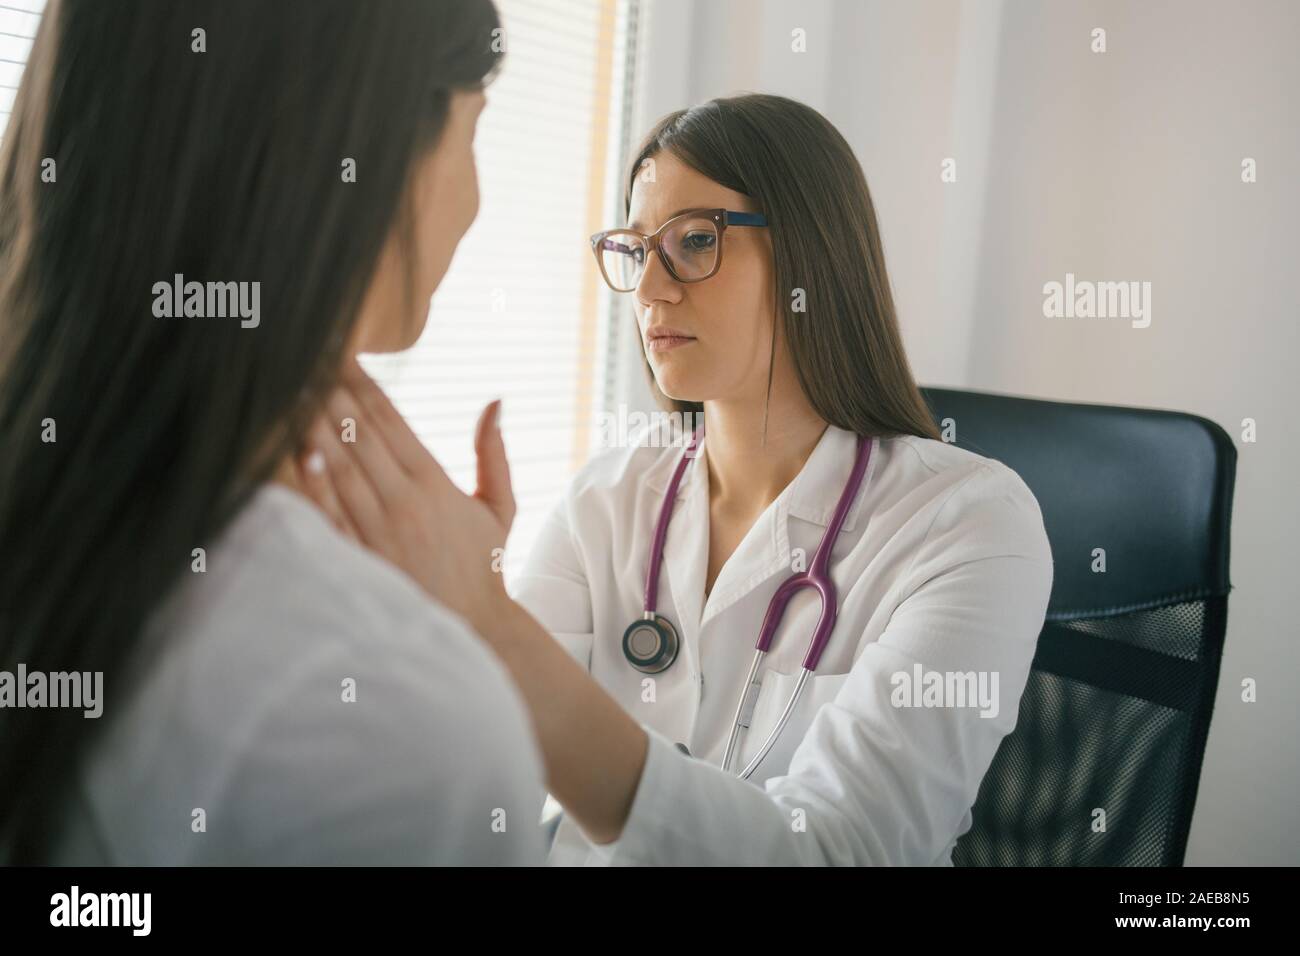 Medical exam. Female doctor palpating lymph nodes of a patient Stock Photo